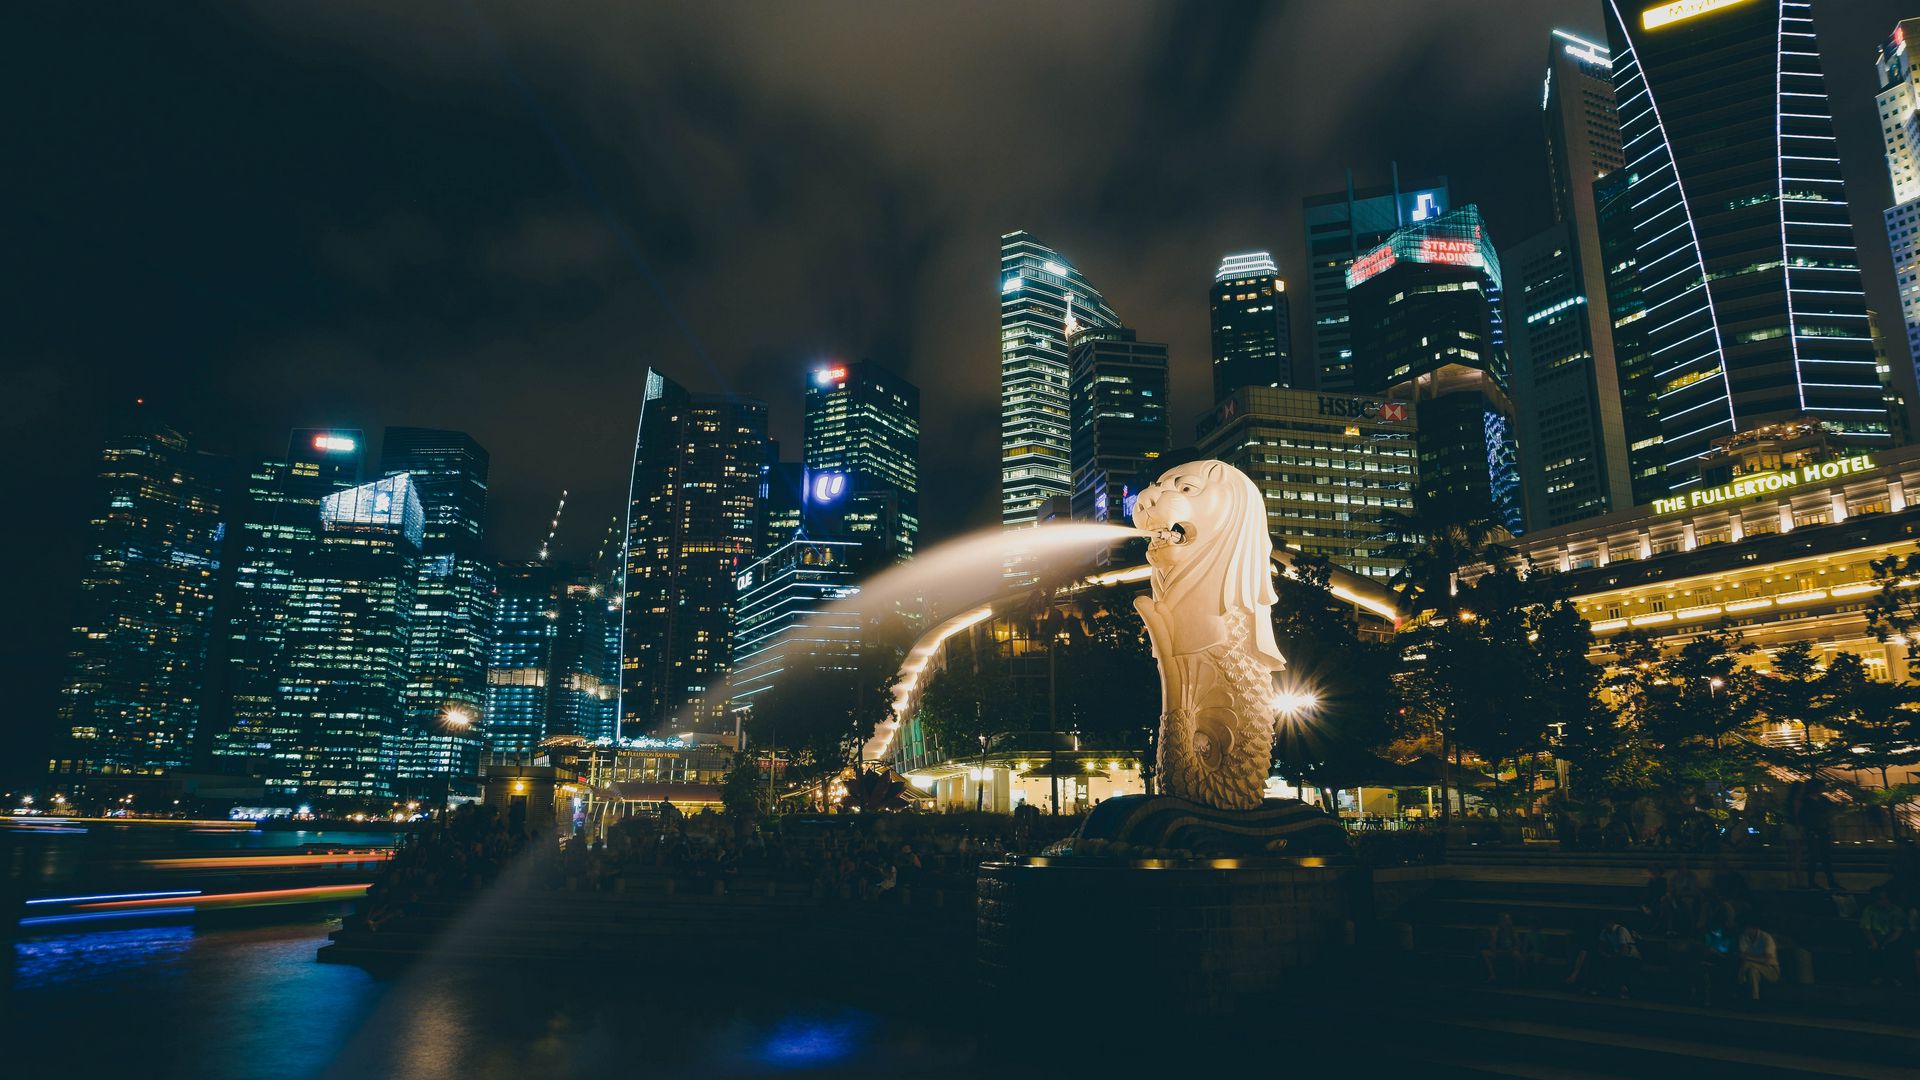 Download wallpaper 1920x1080 singapore, fountain, skyscrapers full hd,  hdtv, fhd, 1080p hd background